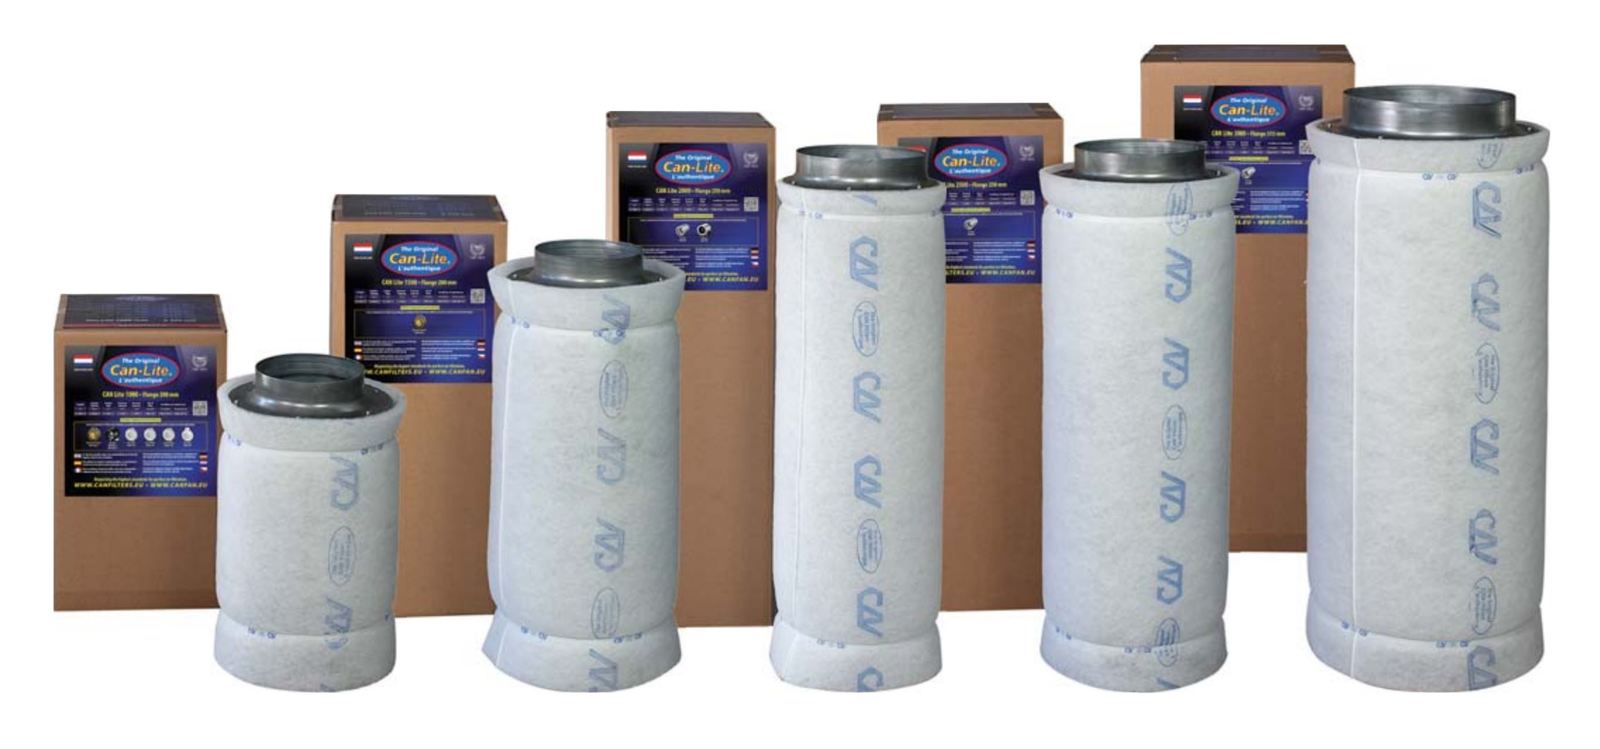 CF MAX 4500 400mm Can Filter Carbon Filter 1000mm long 500mm wide